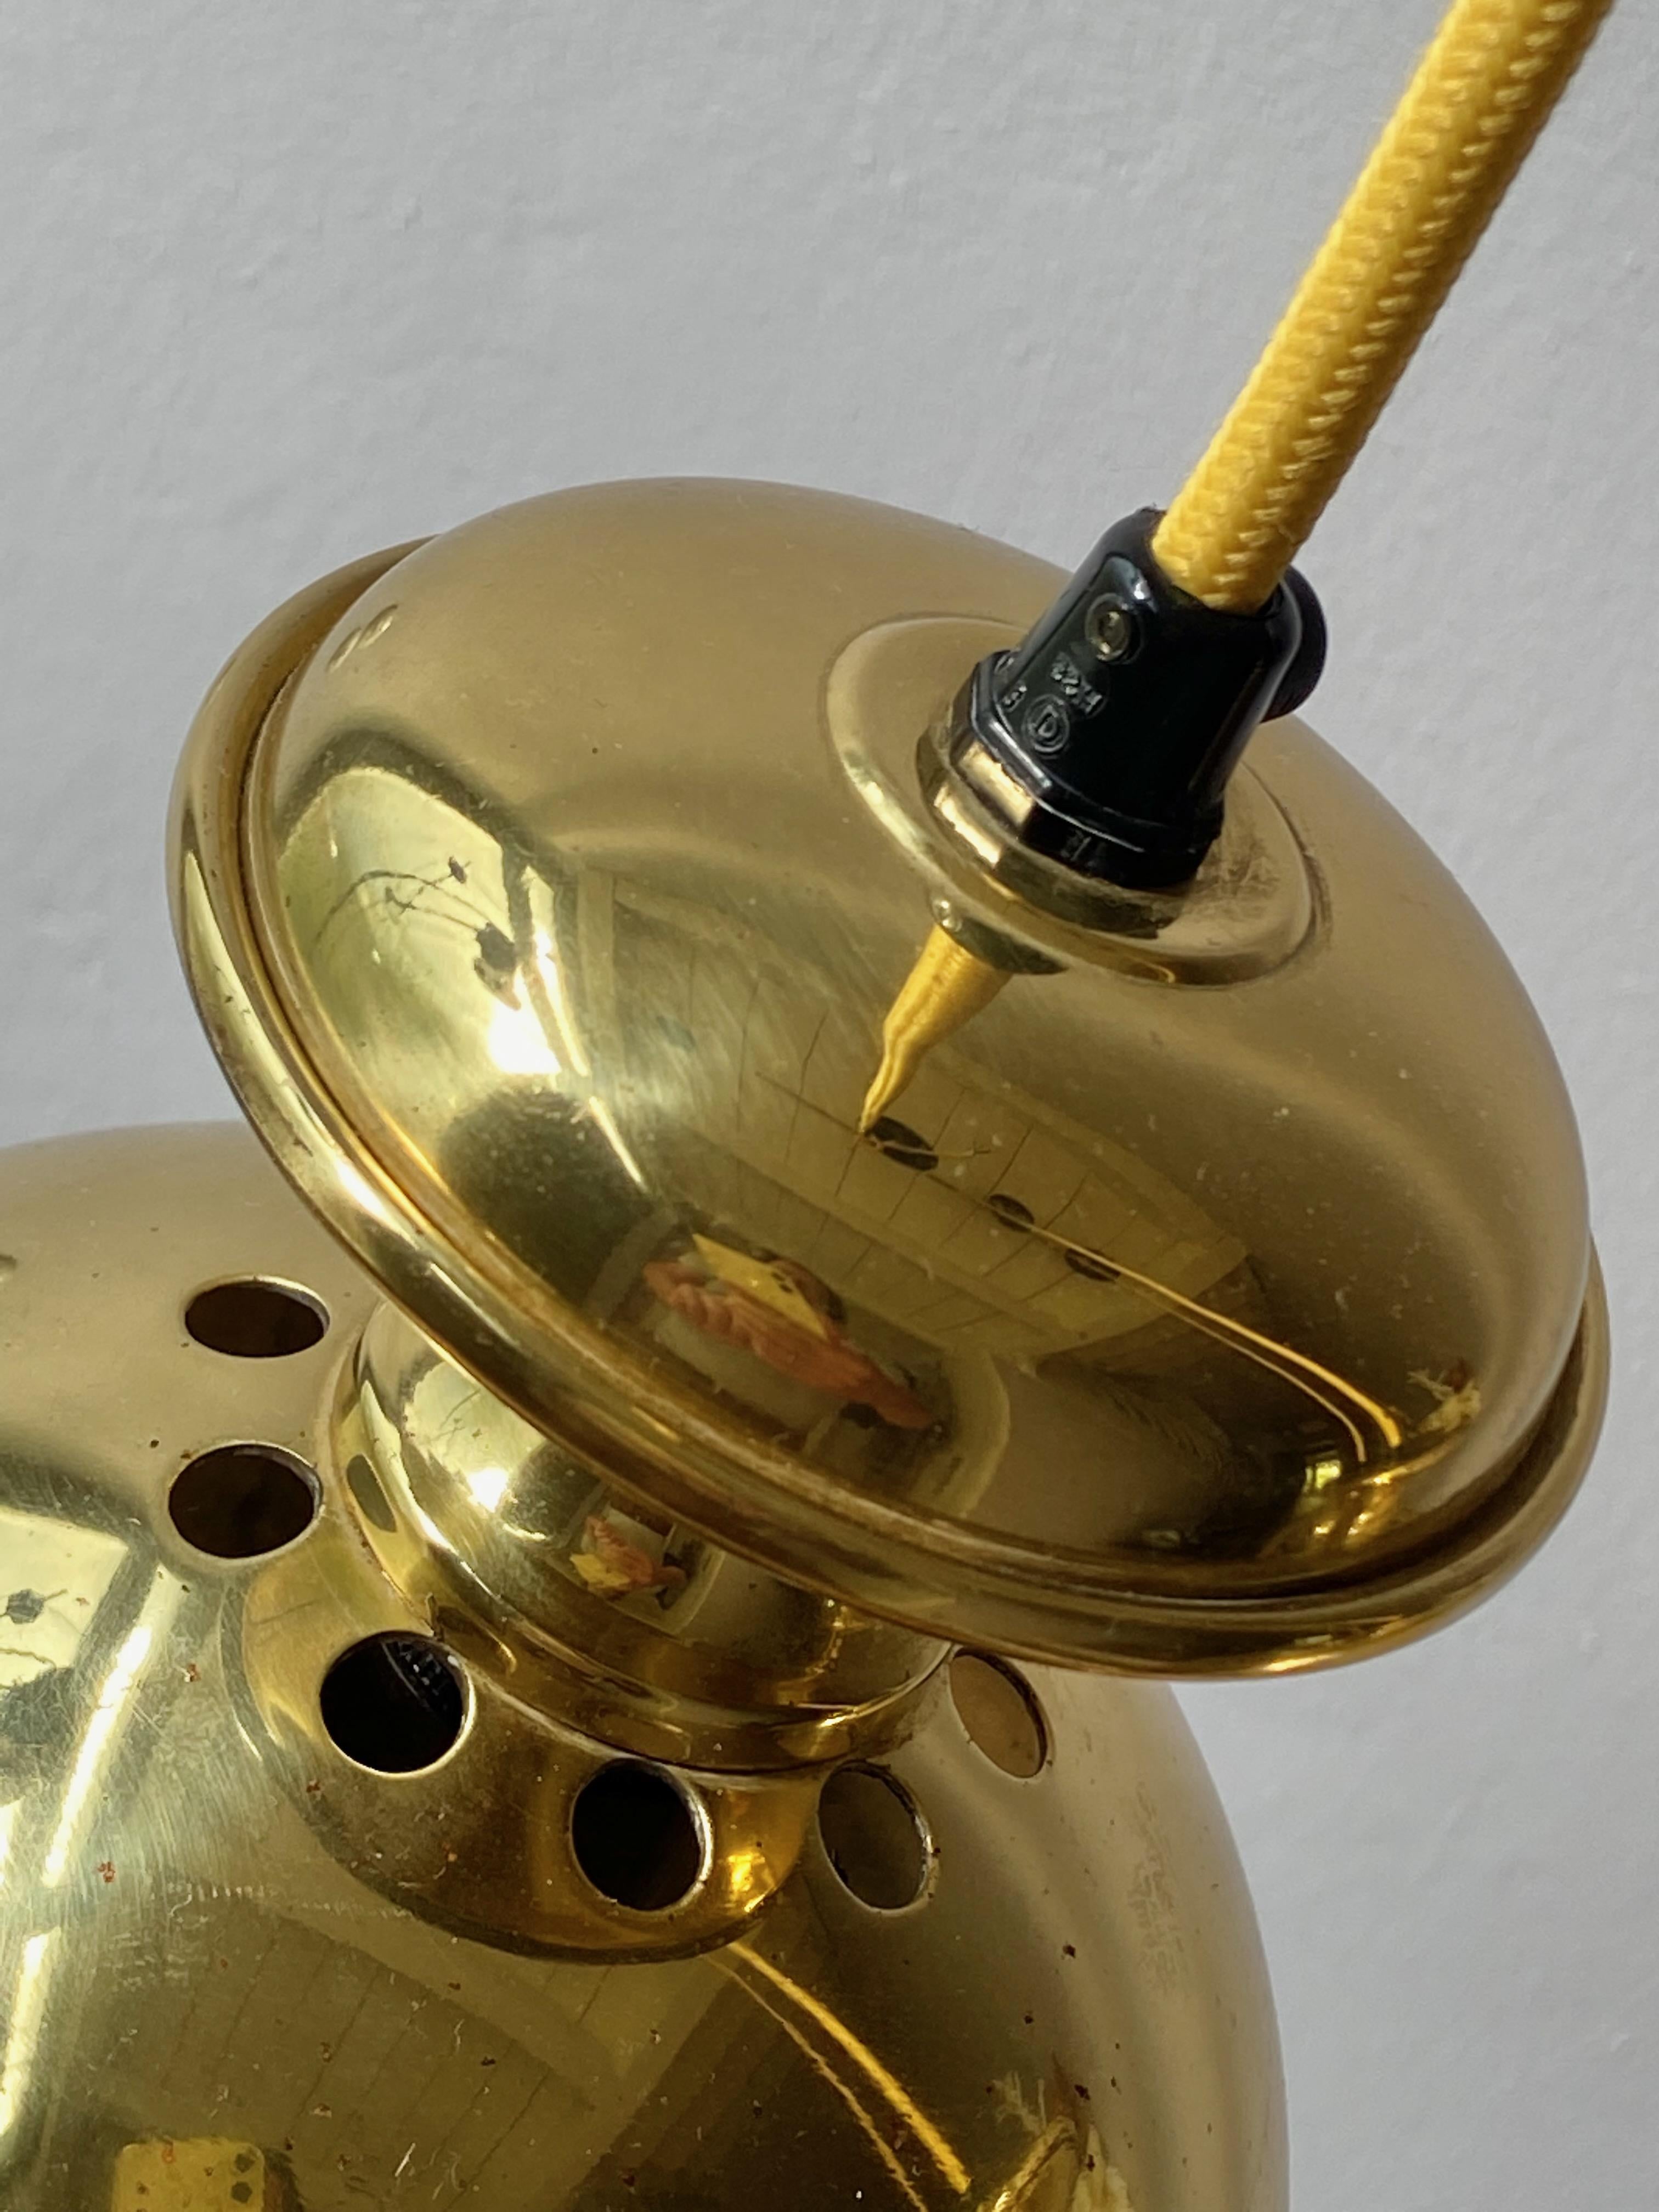 Nice set of three pendant lamps typ 'Golden Bell' design and produced by Scnadi-Lamp in 1960's, Made in Denmark. Polished brass with 1x E14 Edison screw socket in original condition. No parts missing, with new yellow fabric cord, ready to use with